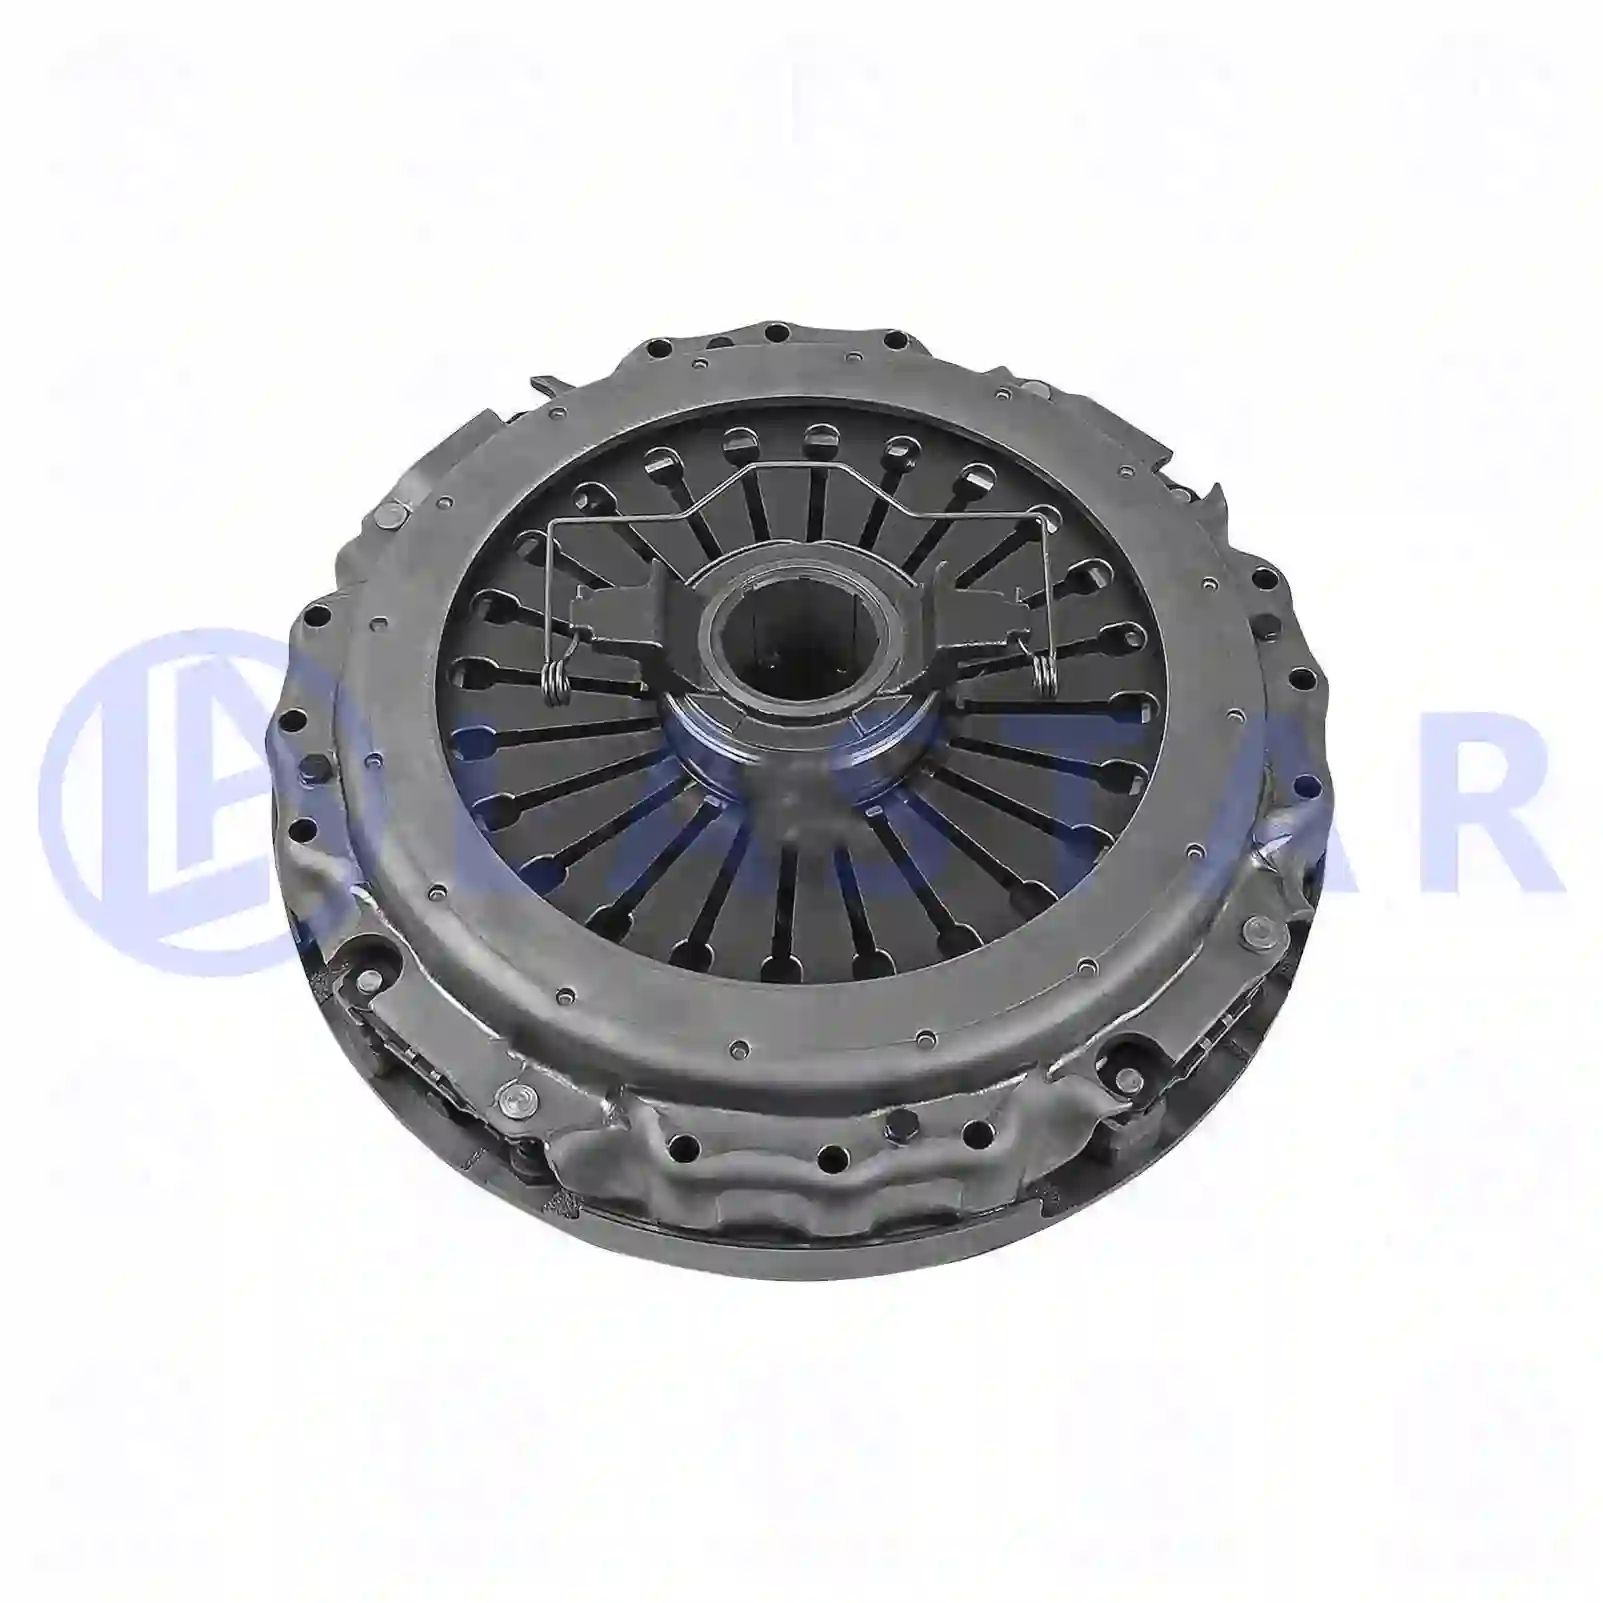 Clutch cover, with release bearing, 77722255, 20366876, 20569145, 20571156, 8172350, 85000252, 85003120 ||  77722255 Lastar Spare Part | Truck Spare Parts, Auotomotive Spare Parts Clutch cover, with release bearing, 77722255, 20366876, 20569145, 20571156, 8172350, 85000252, 85003120 ||  77722255 Lastar Spare Part | Truck Spare Parts, Auotomotive Spare Parts